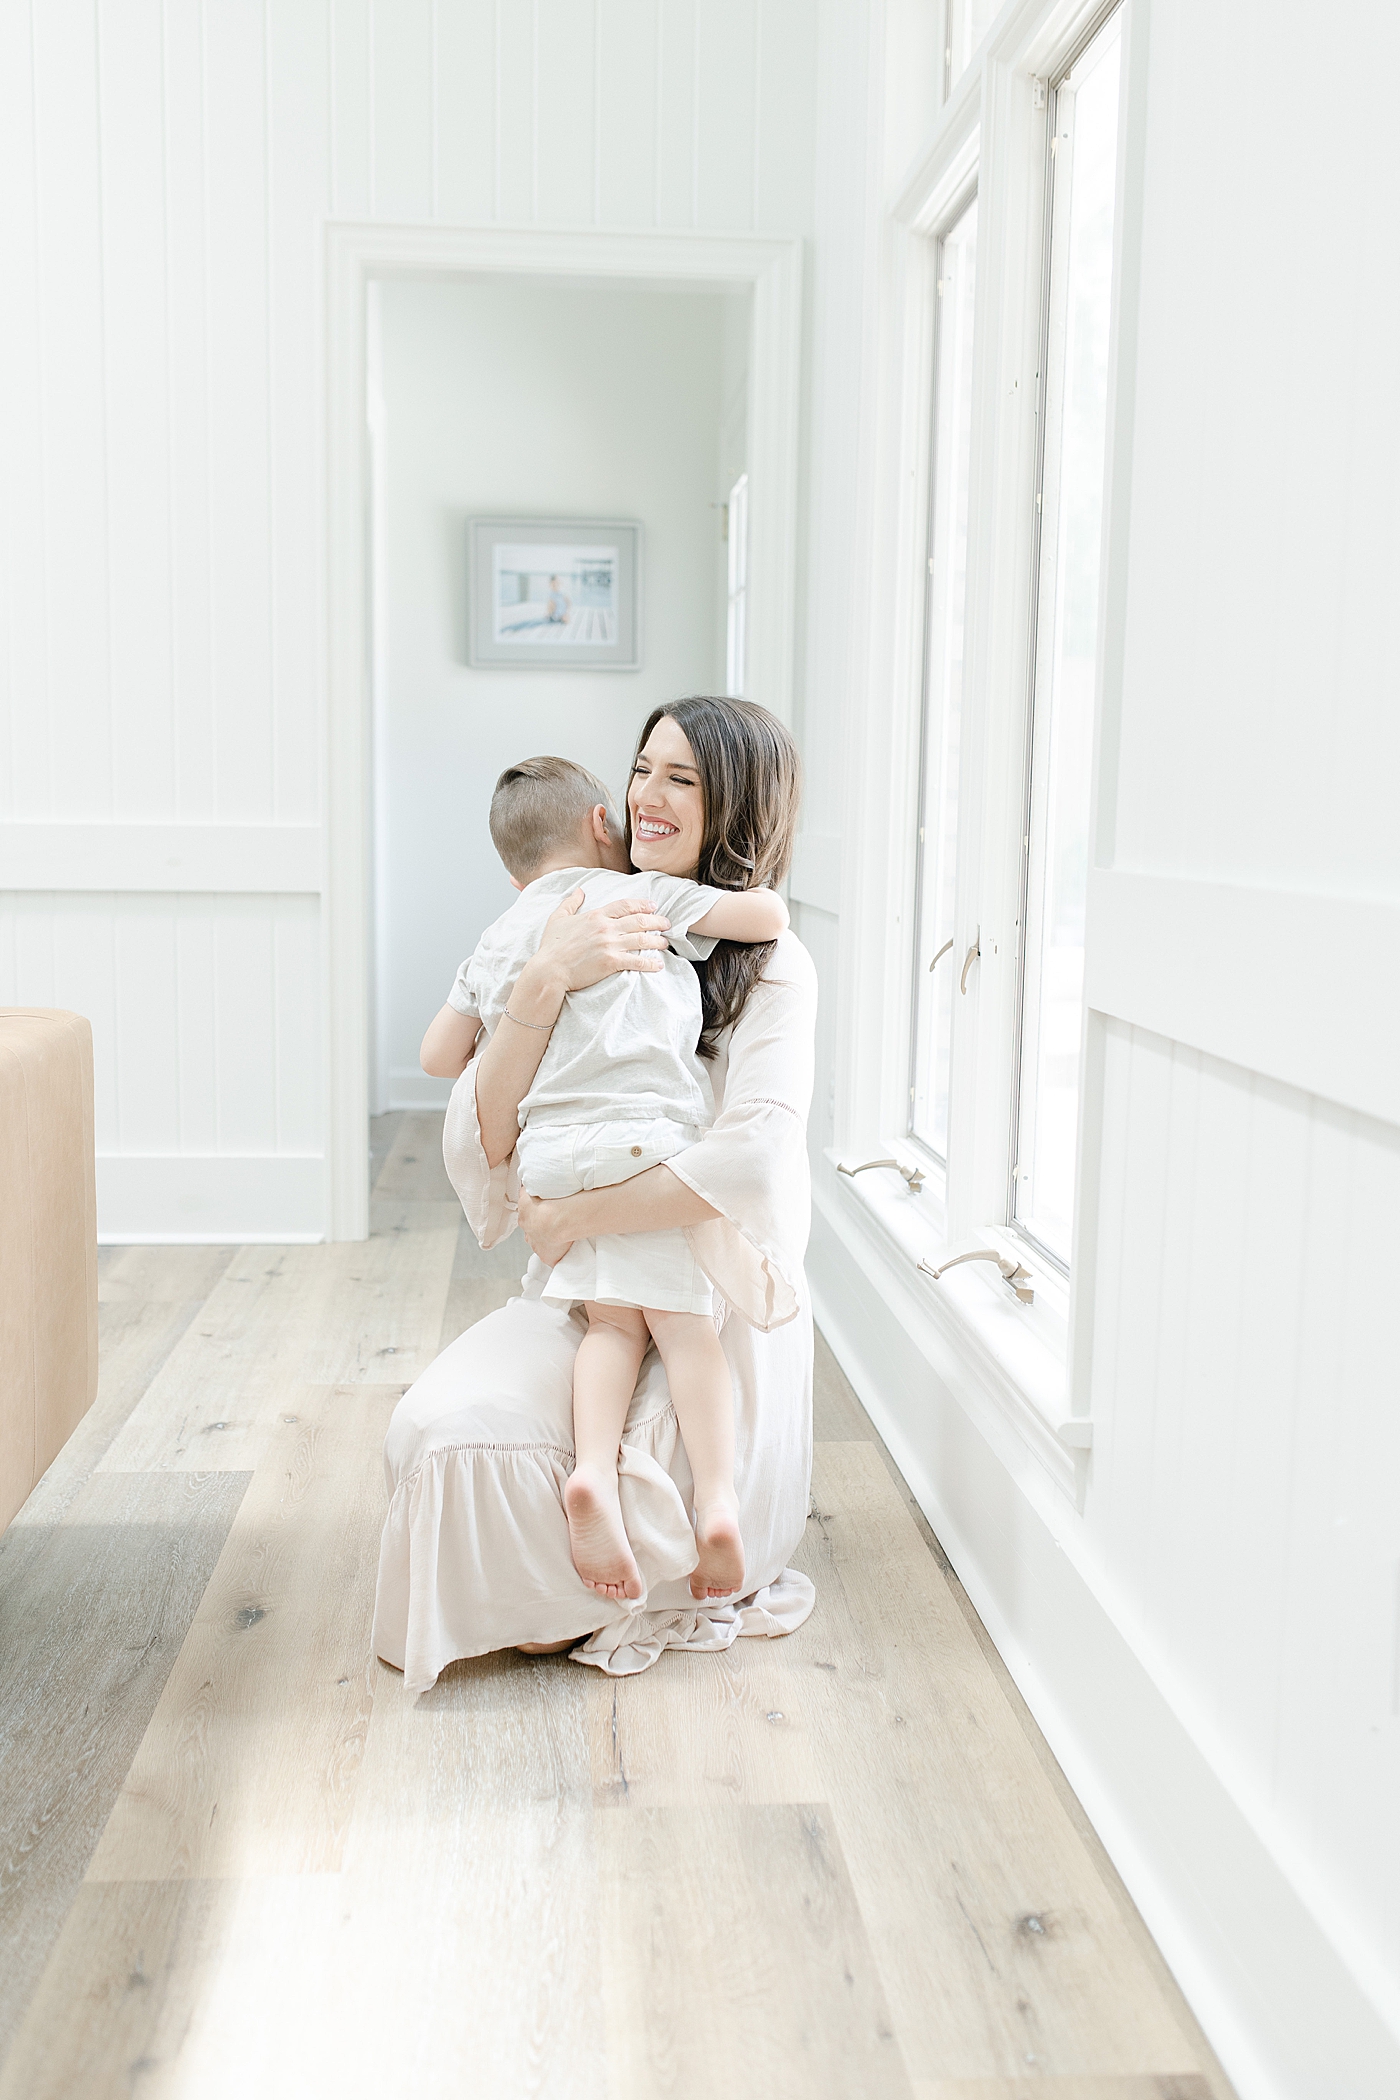 Mom hugging her son during in-home session. Photo by Little Sunshine Photography